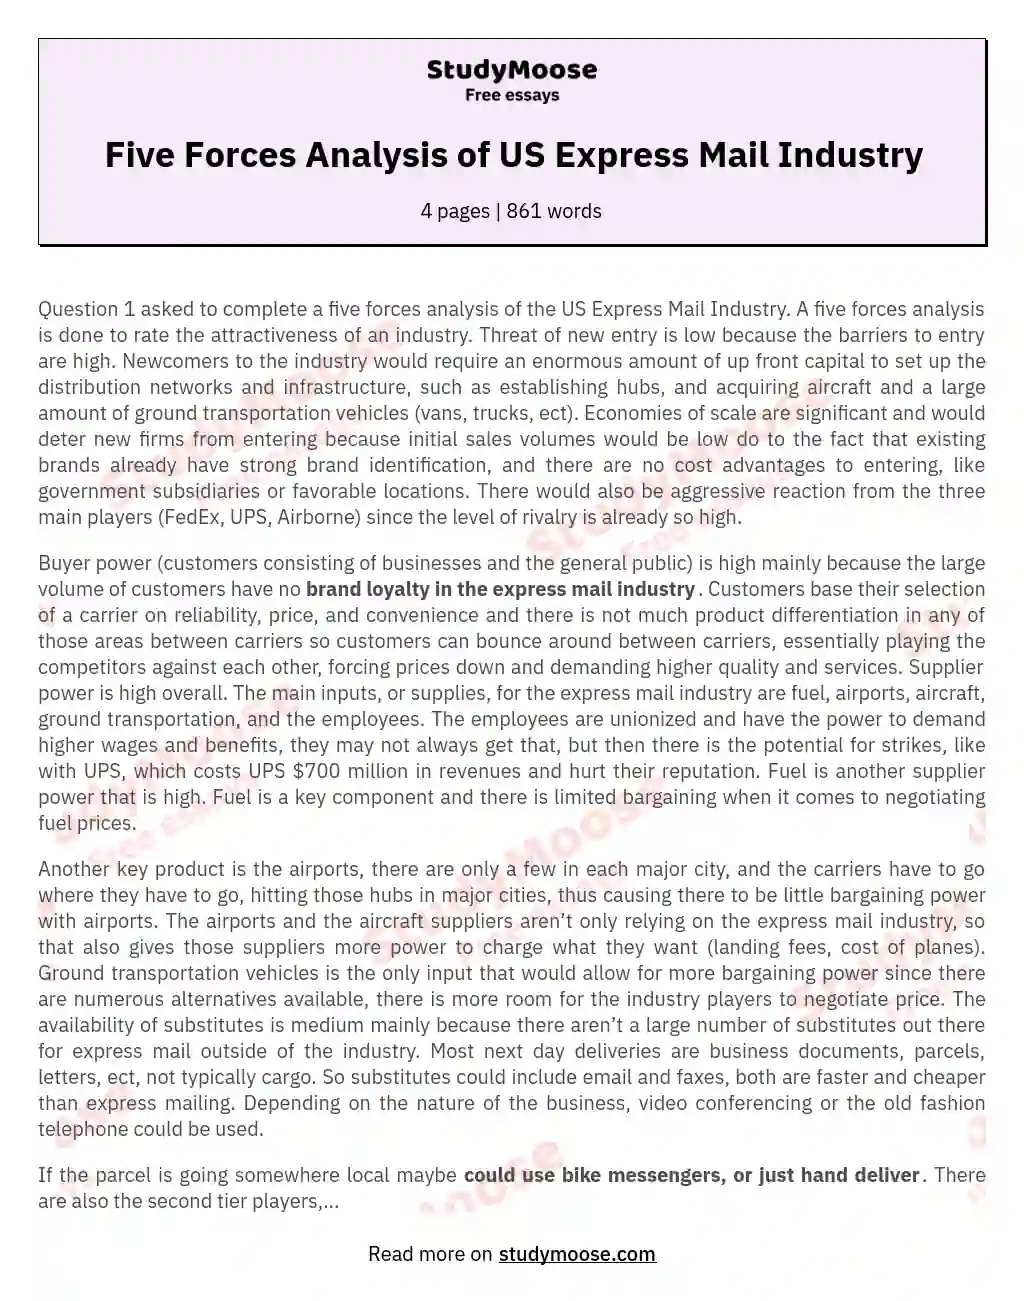 Five Forces Analysis of US Express Mail Industry